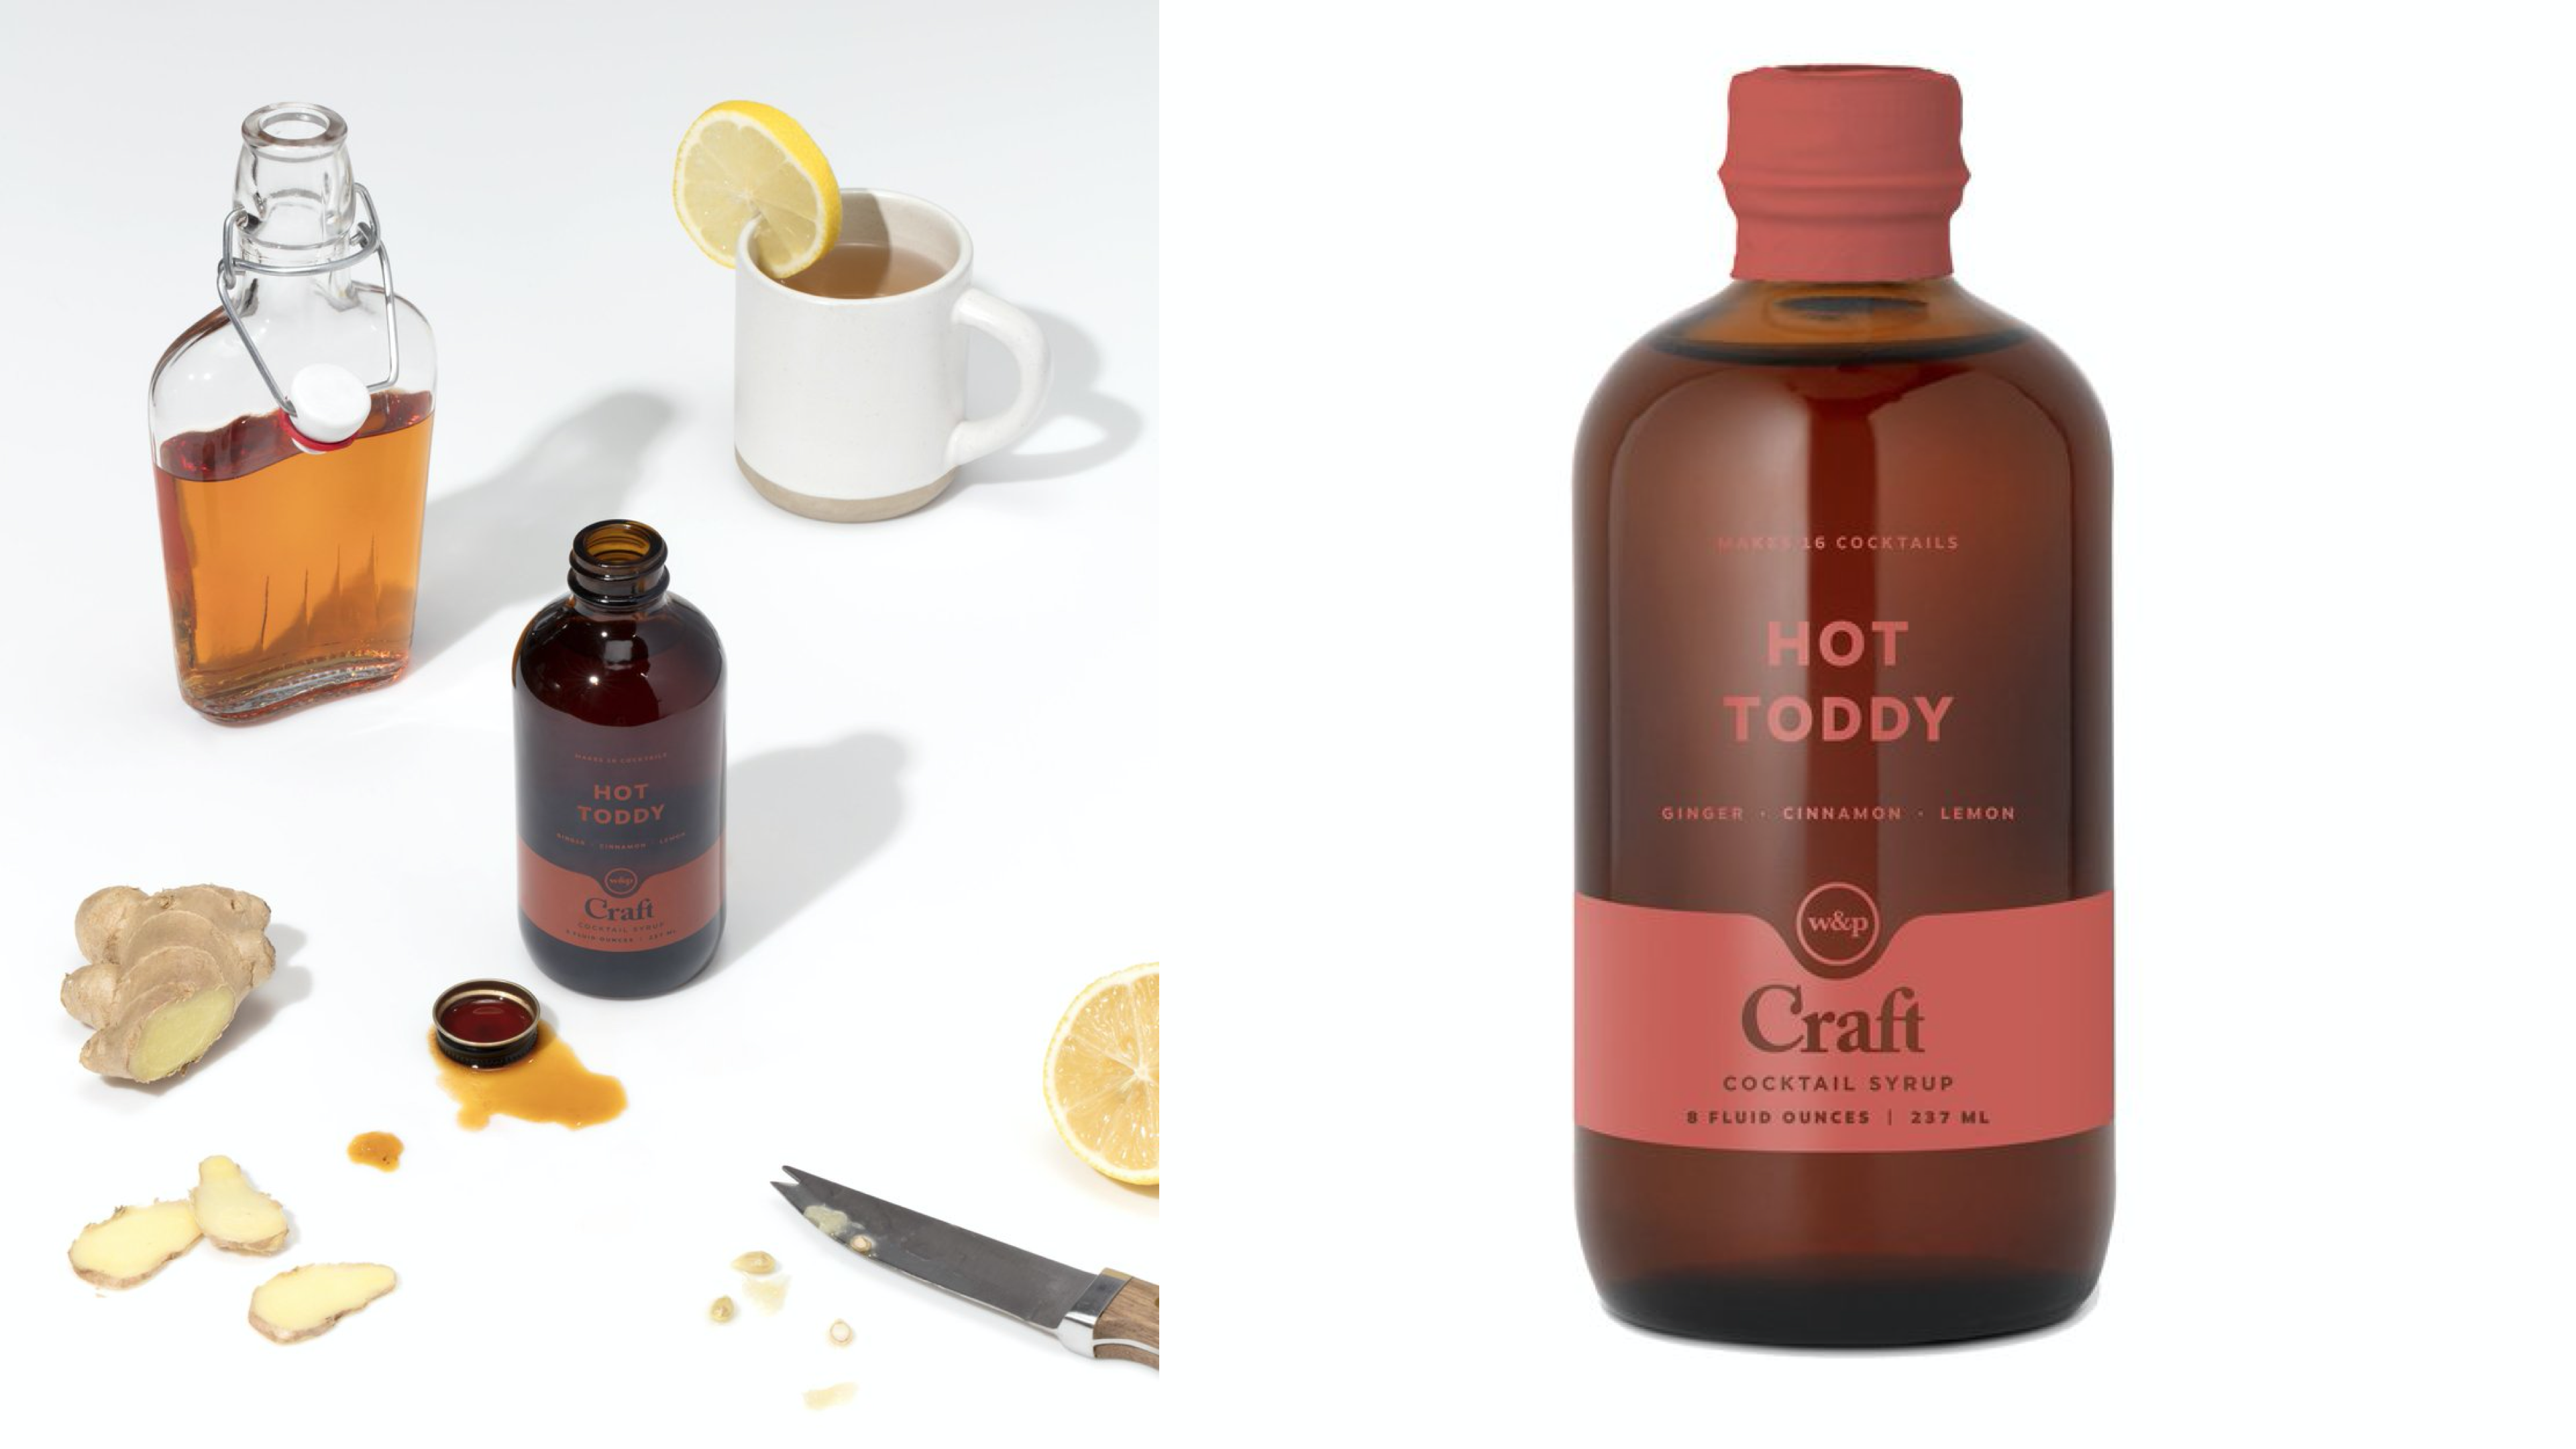 hot toddy cocktail syrup